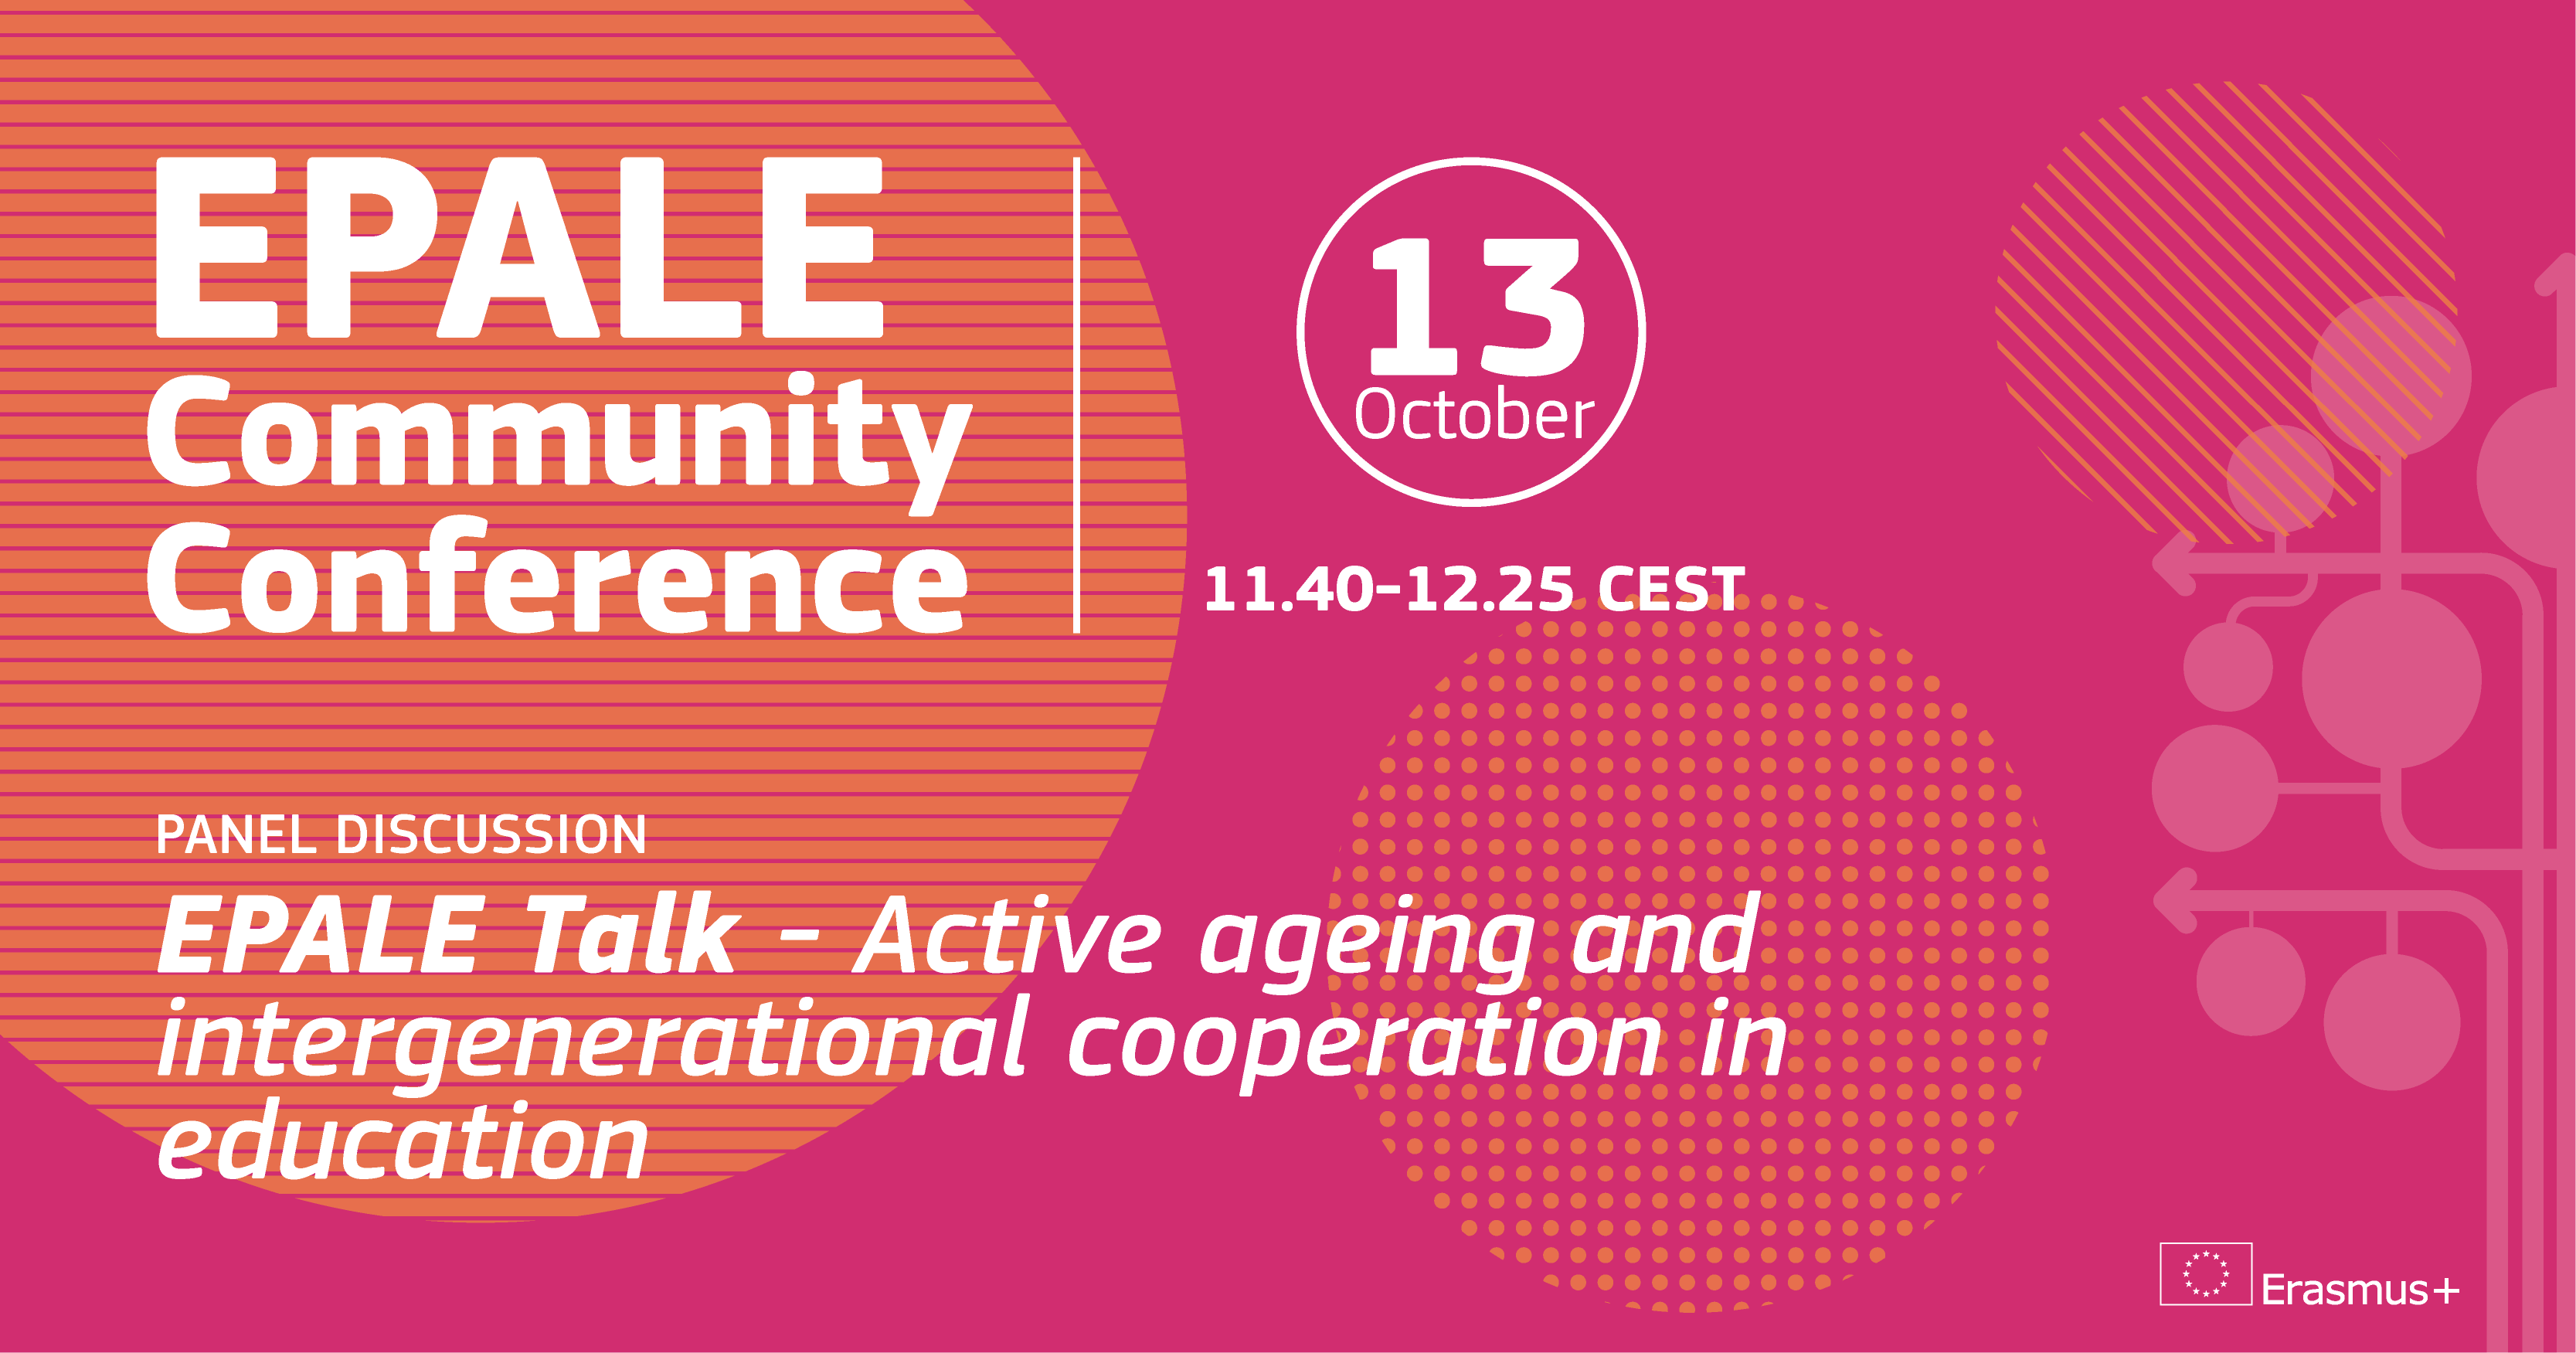 EPALE Community Conference 2021 - EPALE Talk - Active ageing and intergenerational cooperation in education